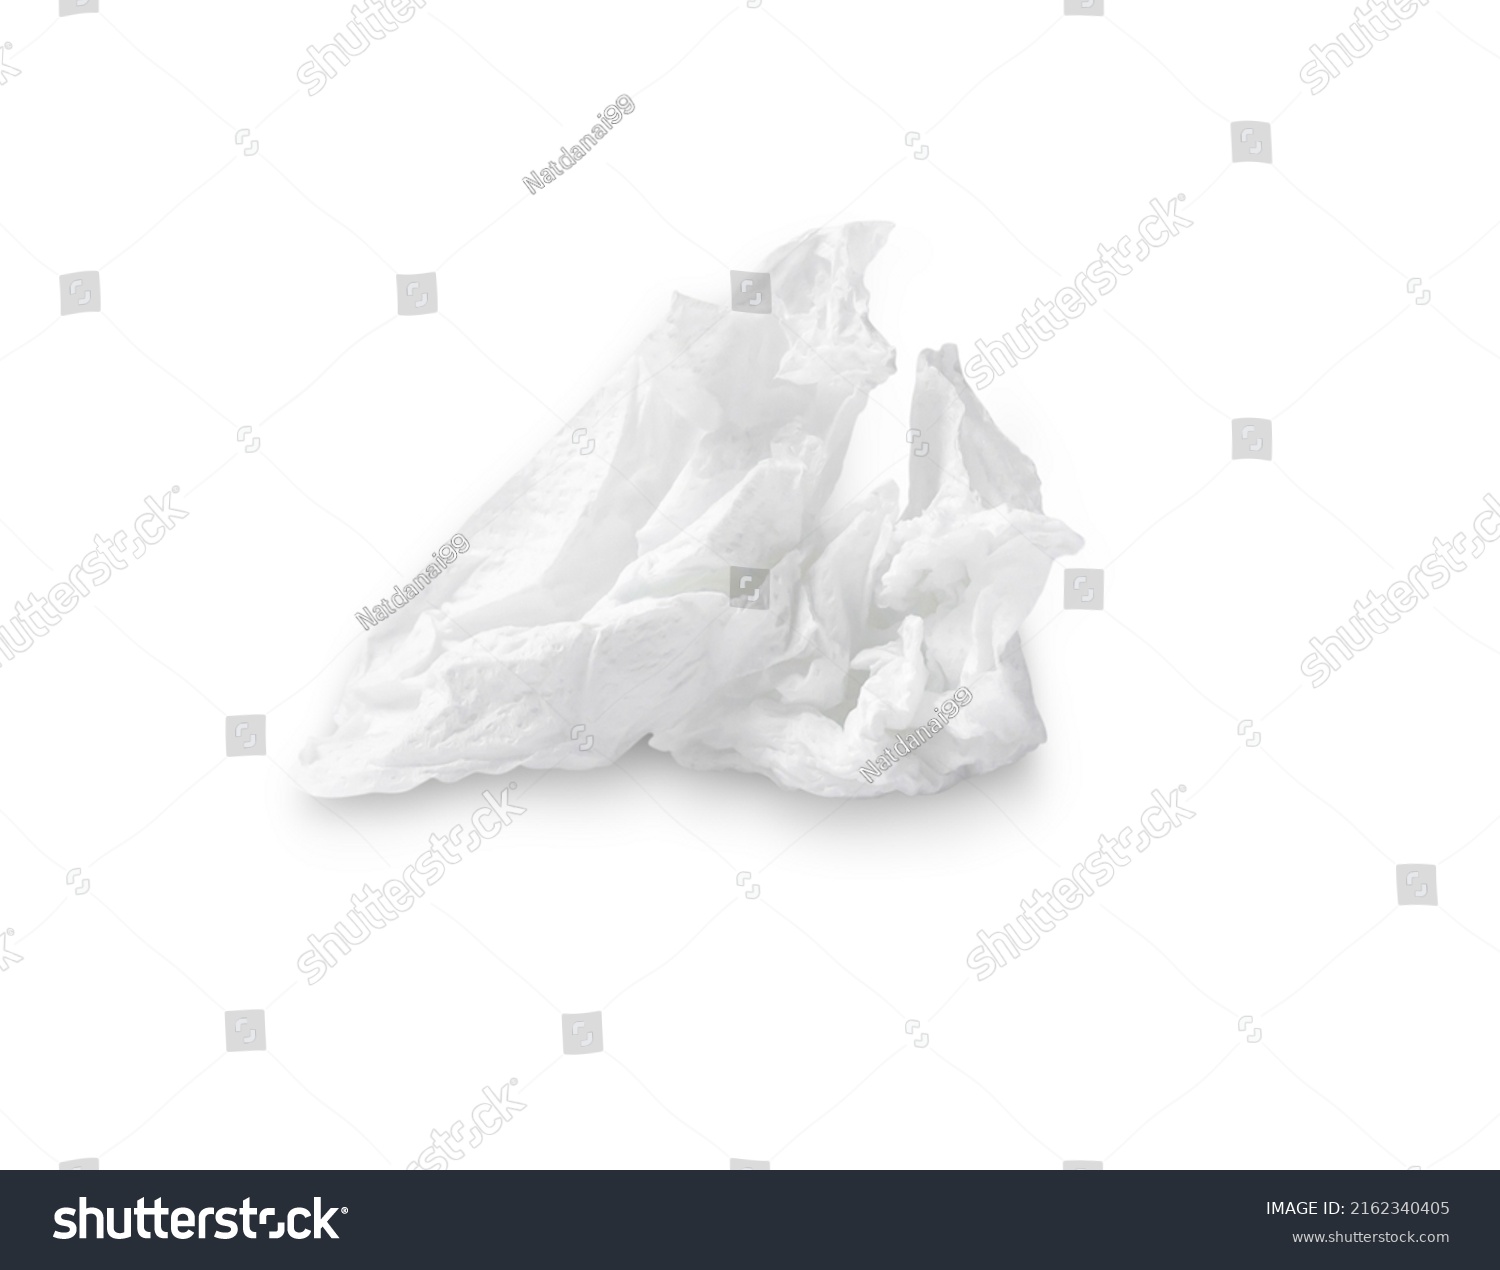 Single screwed or crumpled tissue paper after use is isolated on white background with clipping path. #2162340405